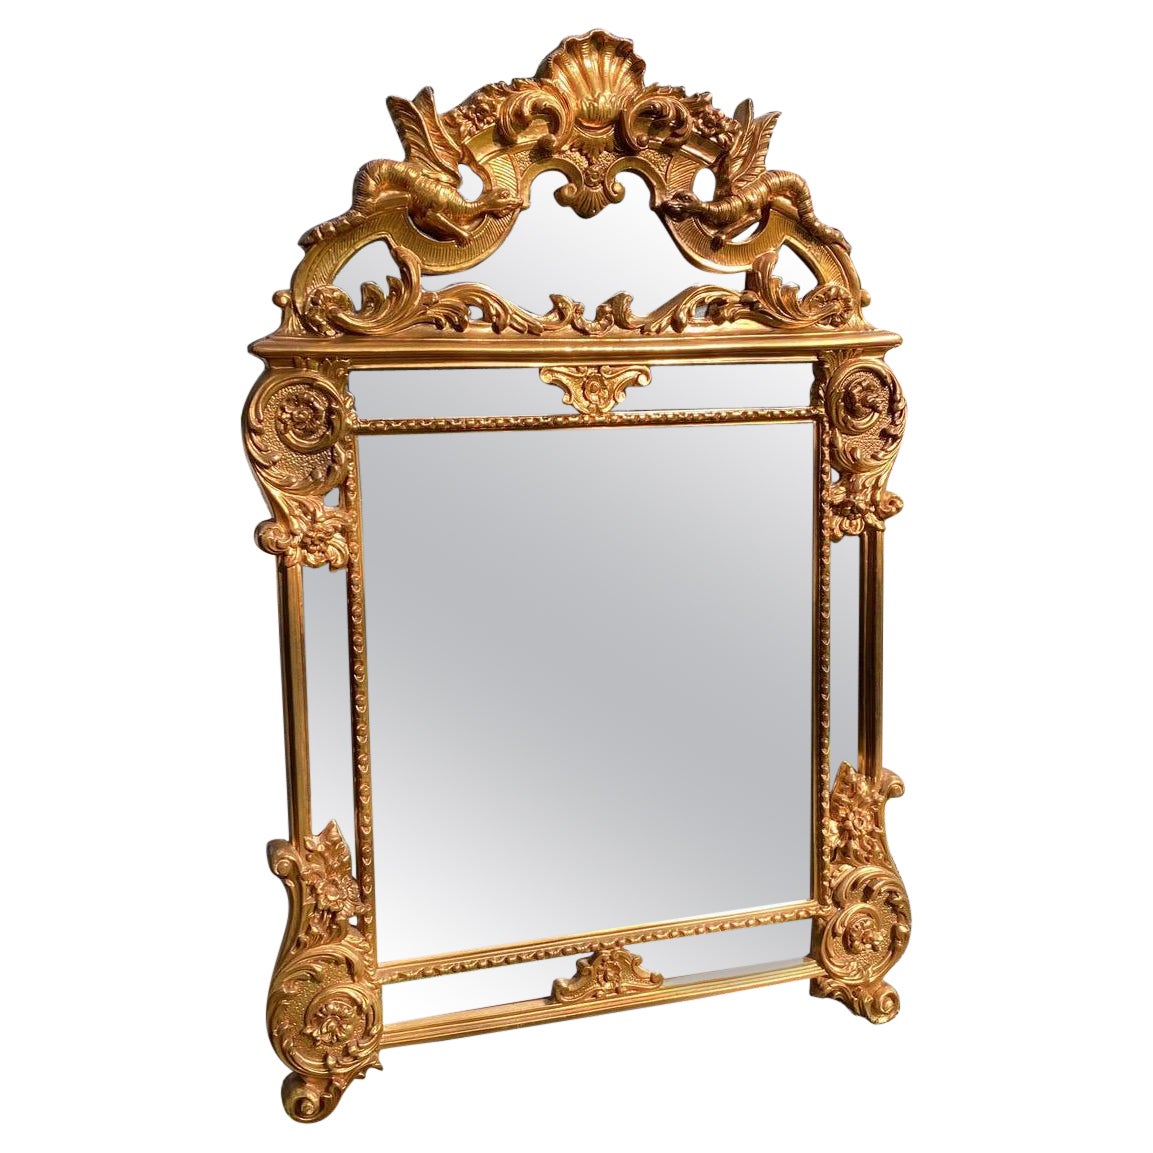 Vintage Italian Regency-Style Reproduction Gold Mirror with Dragon Accents For Sale